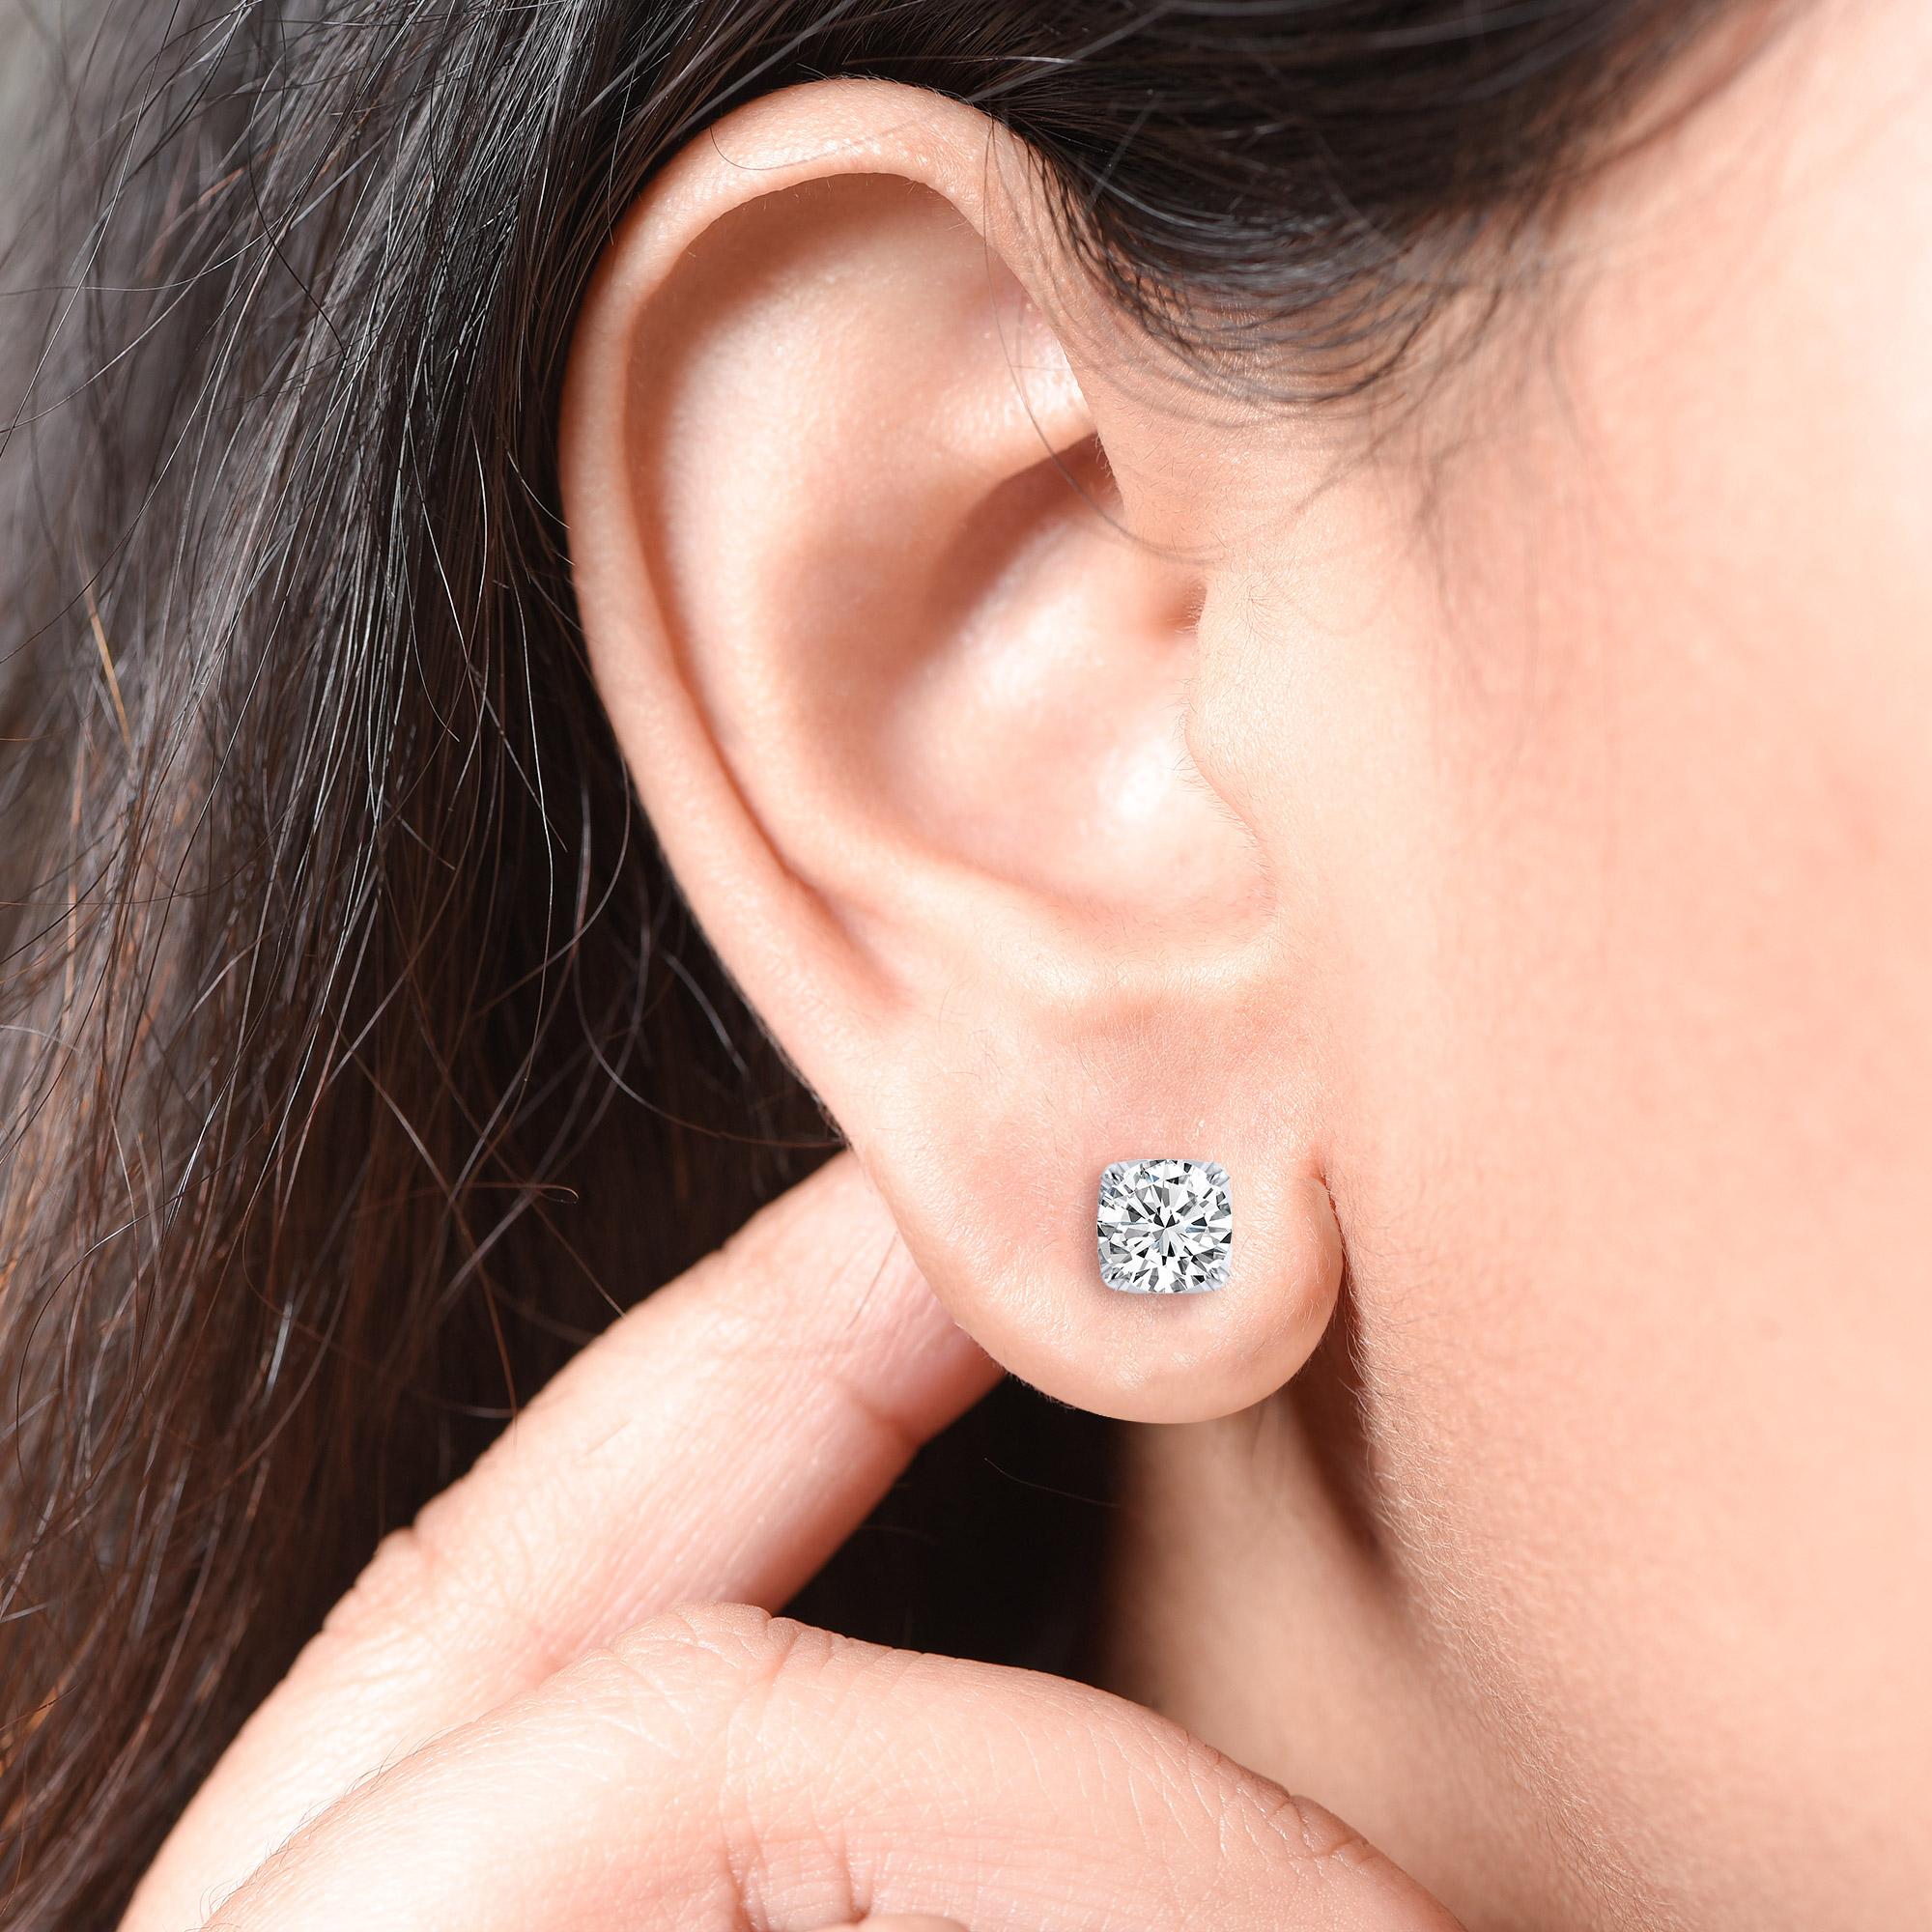 These GIA certified classic diamond studs showcase a pair of perfectly matched diamonds weighing total 1.00 carat. Crafted in 18-karat white gold, these four prong earrings are available in rose and yellow gold as well.

Perfect for gifting and for